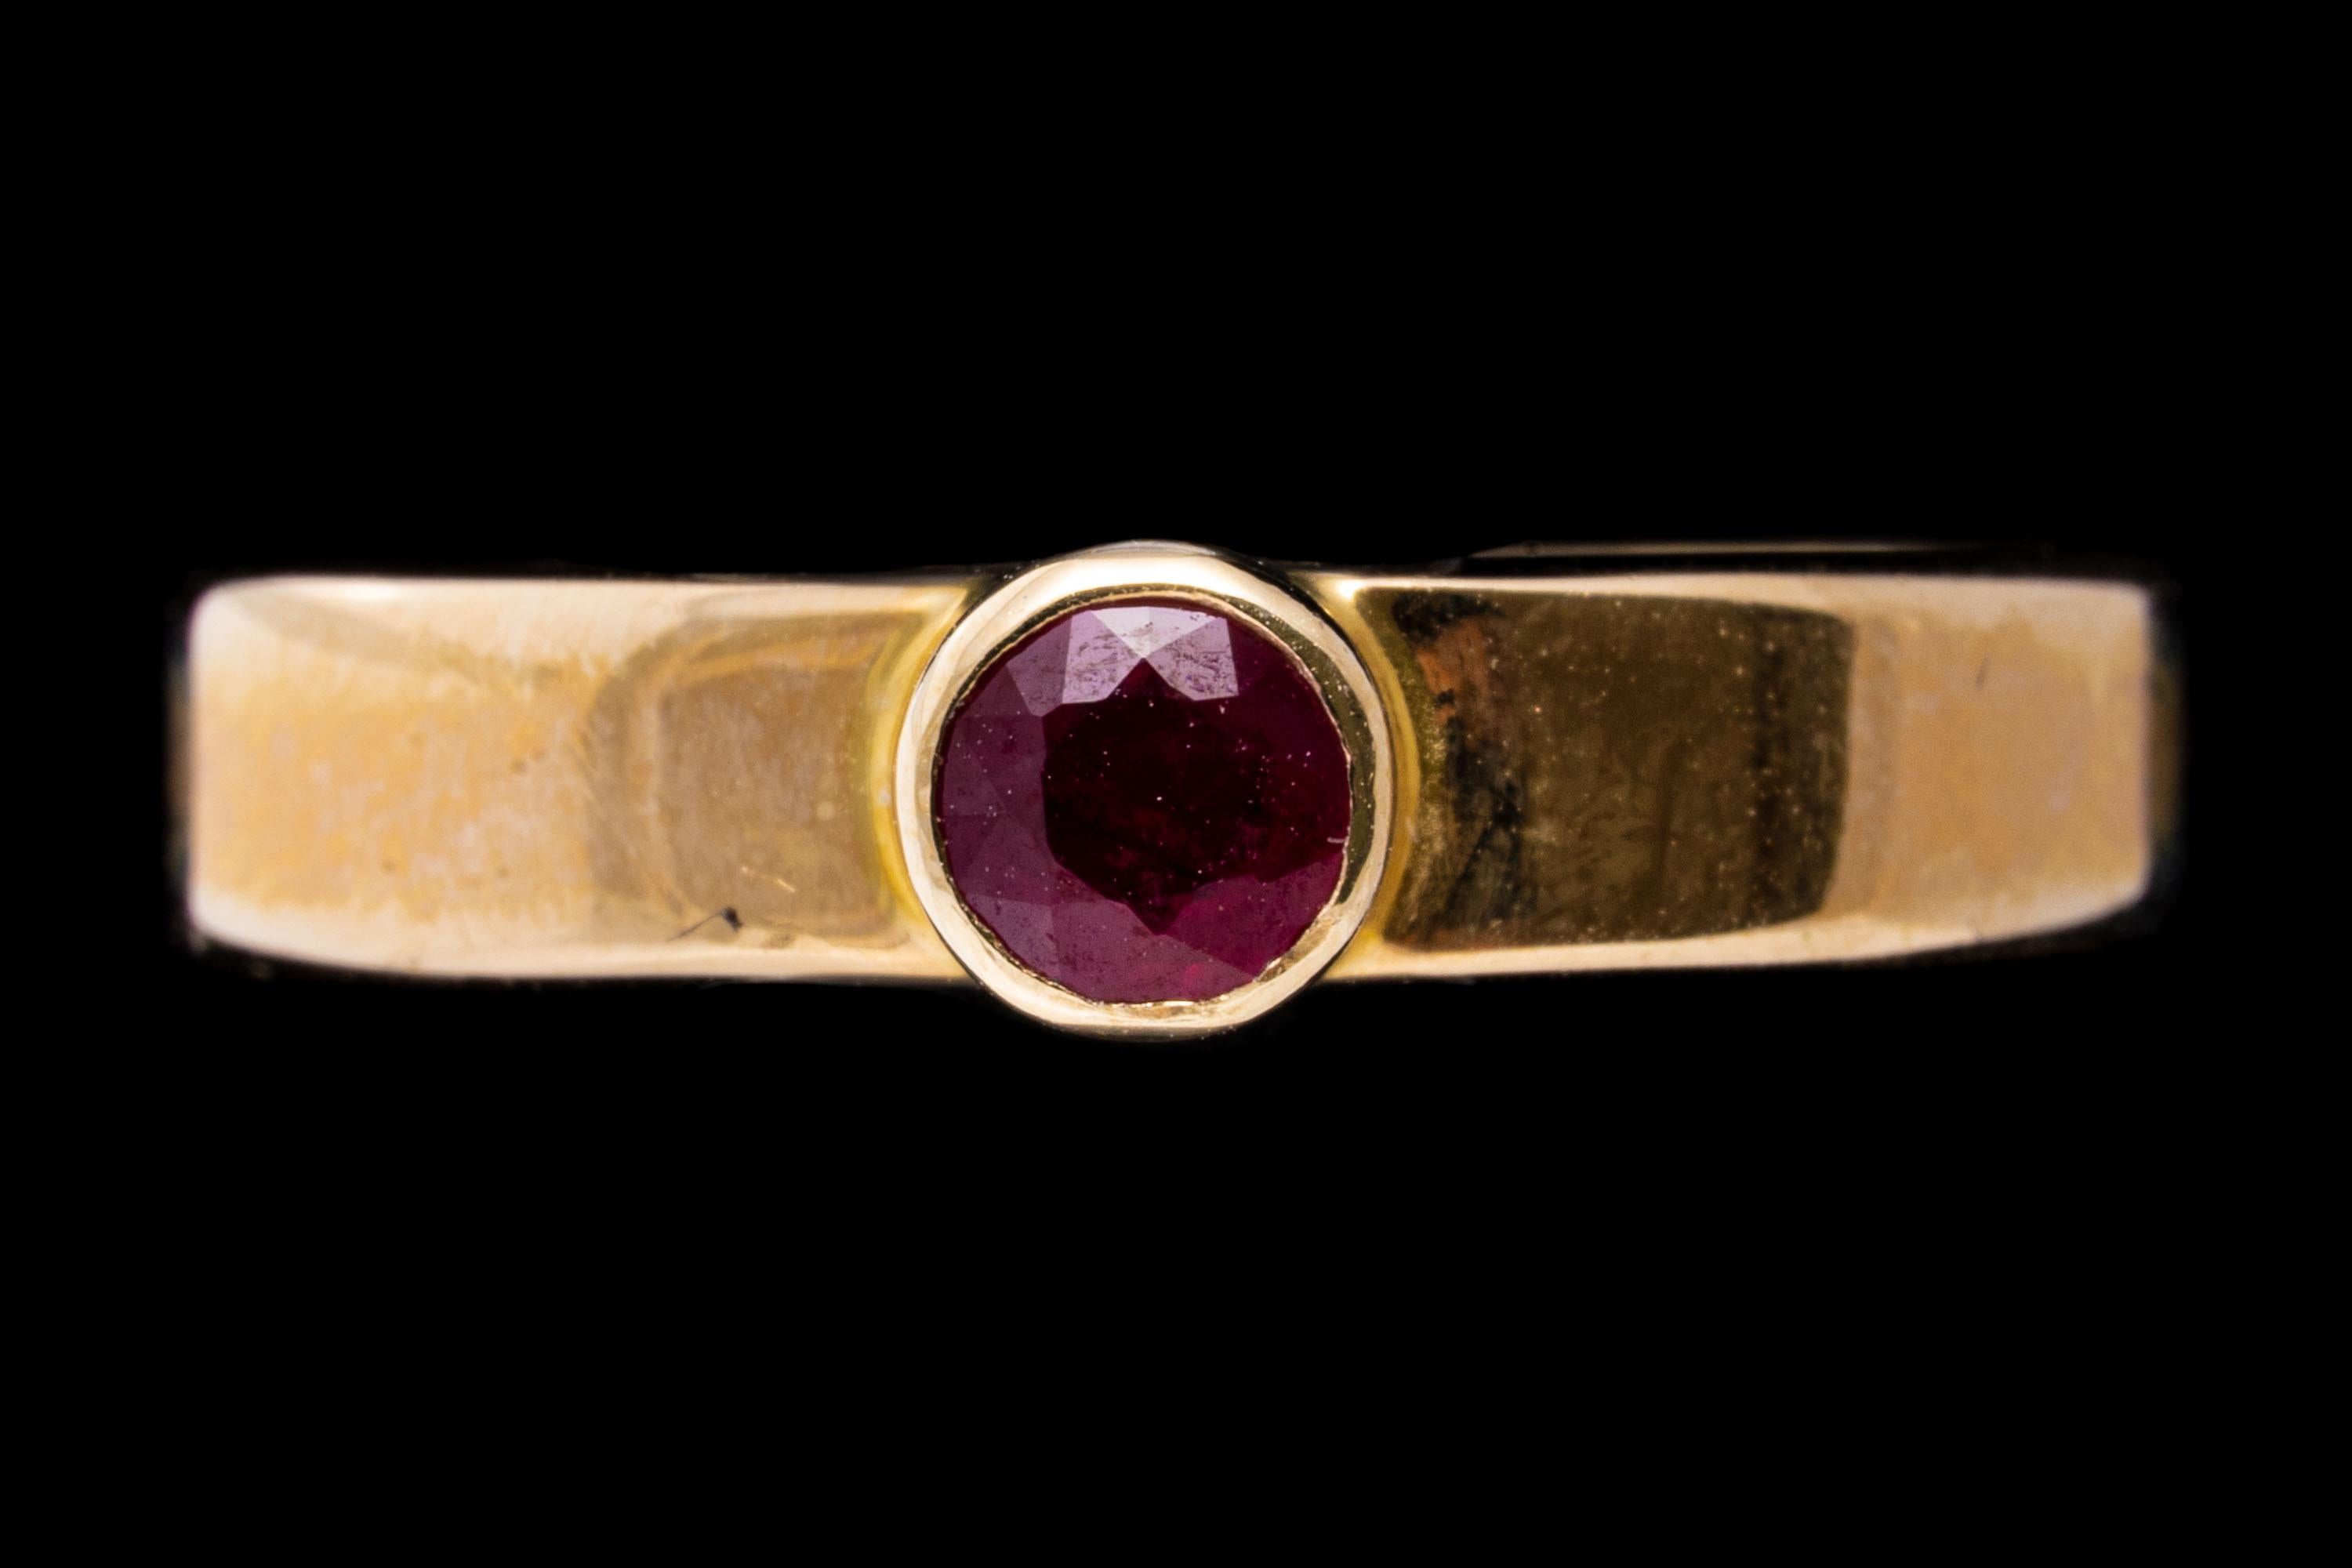 14k yellow gold ring. This simple contemporary band ring is set with a center round faceted, medium to dark pinkish red color ruby, approximately 0.18 CTS, set with a high bezel and finished with a high polished finish.
Marks: 14k 
Dimensions: 3/16